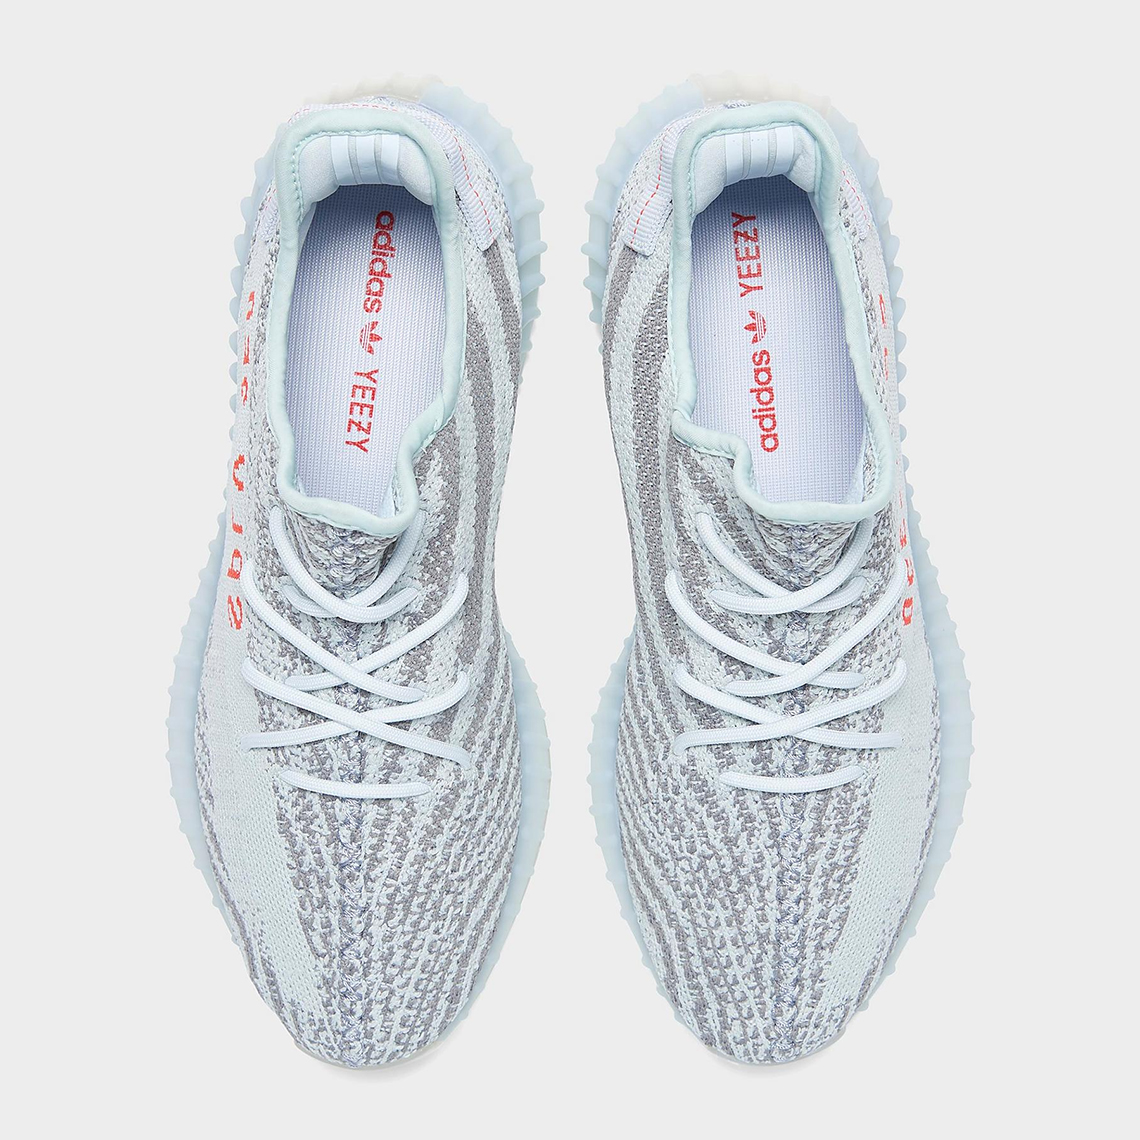 Adidas Yeezy Boost 350 V2 Blue Tint B37571 2022 Release Date 5